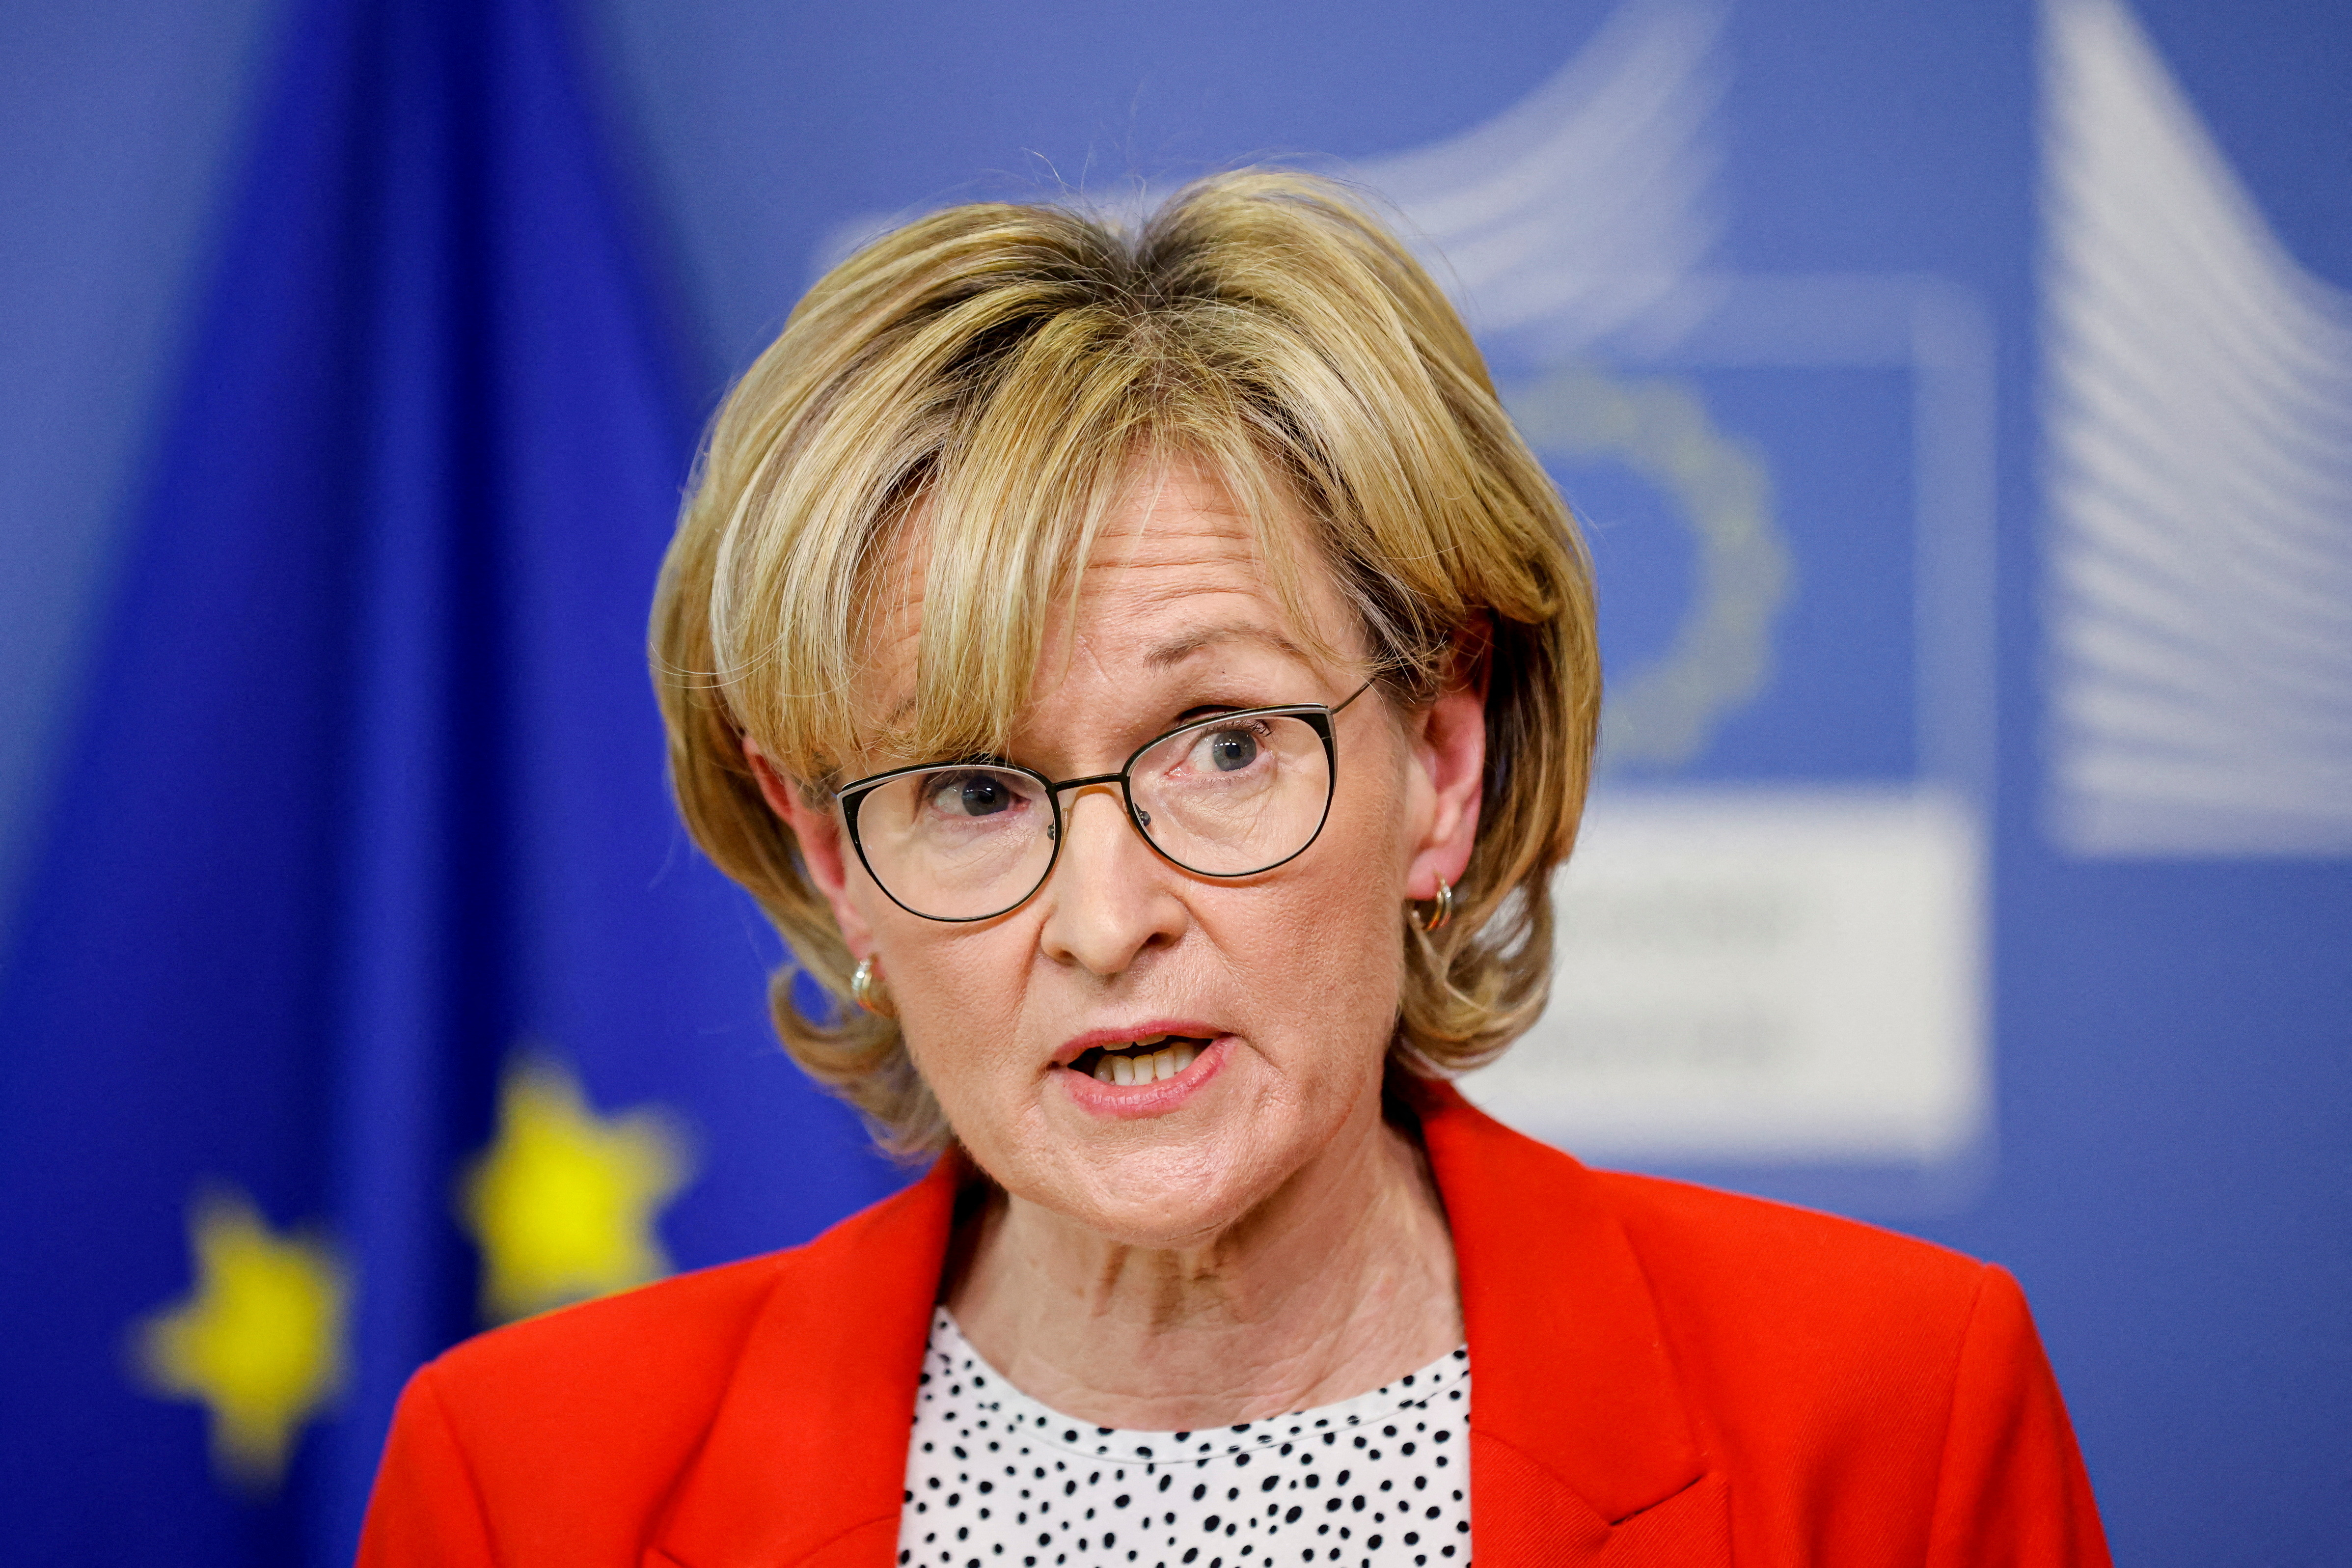 EU Commissioner McGuinness at a news conference in Brussels